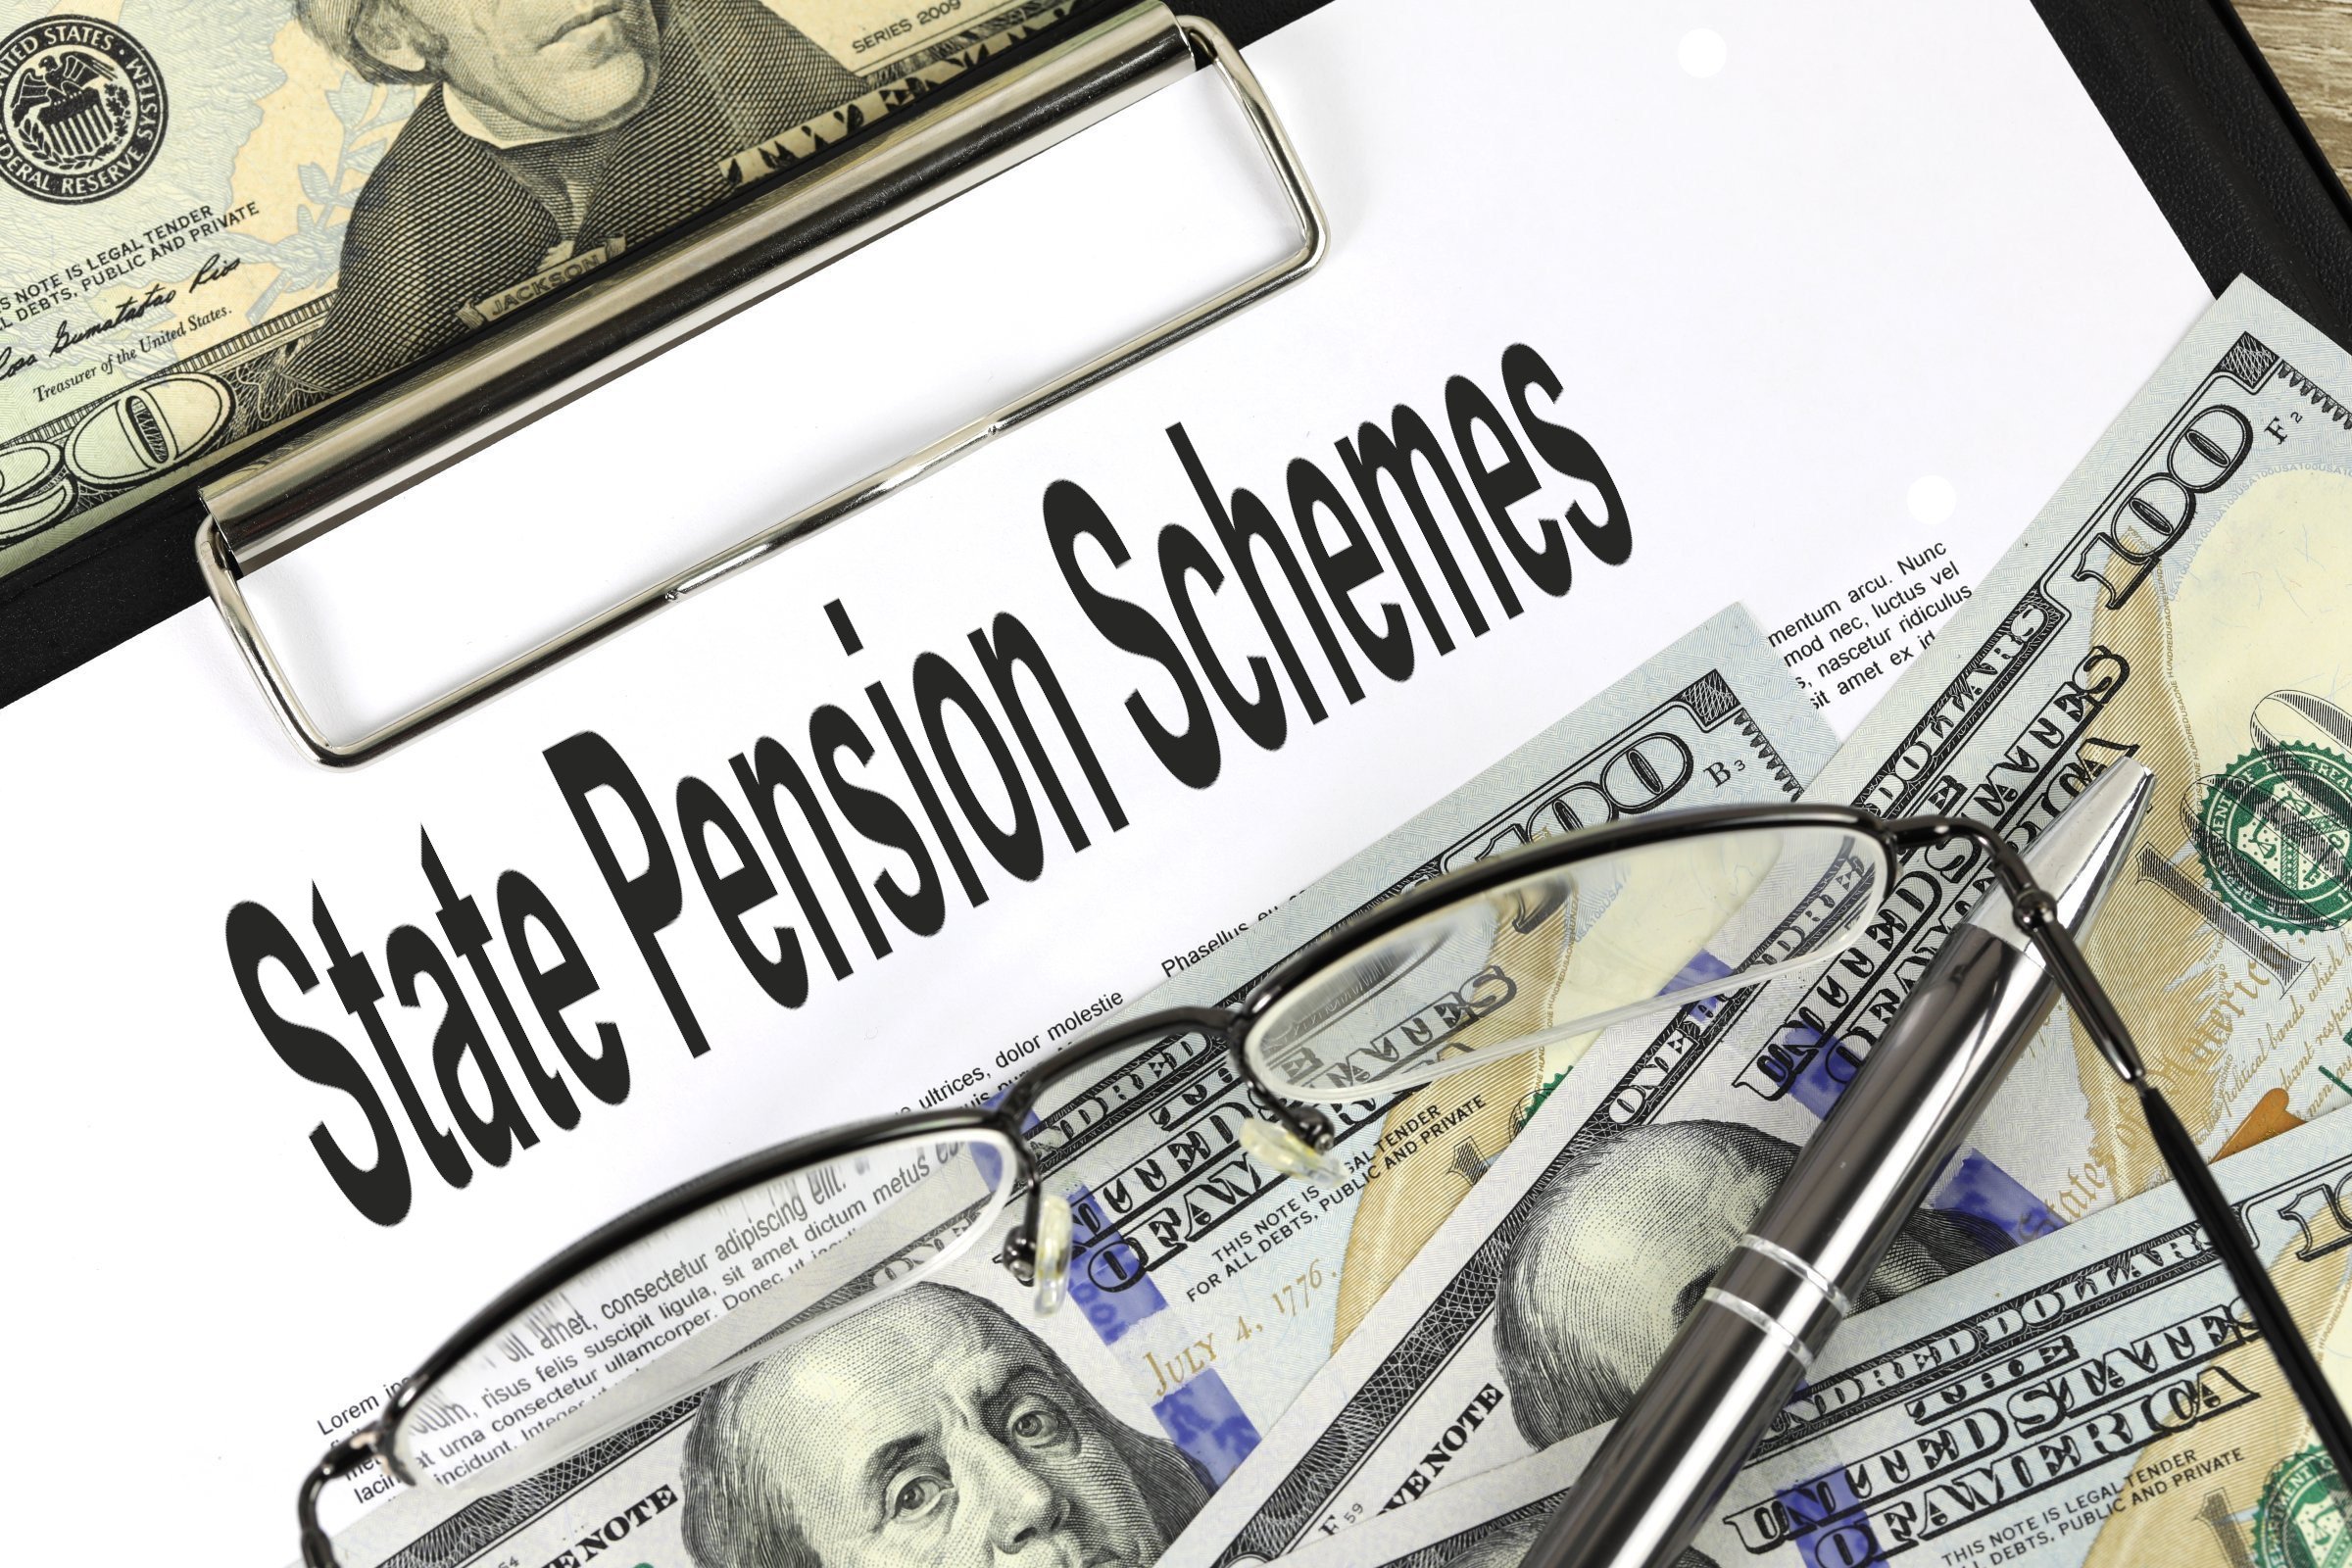 state pension schemes